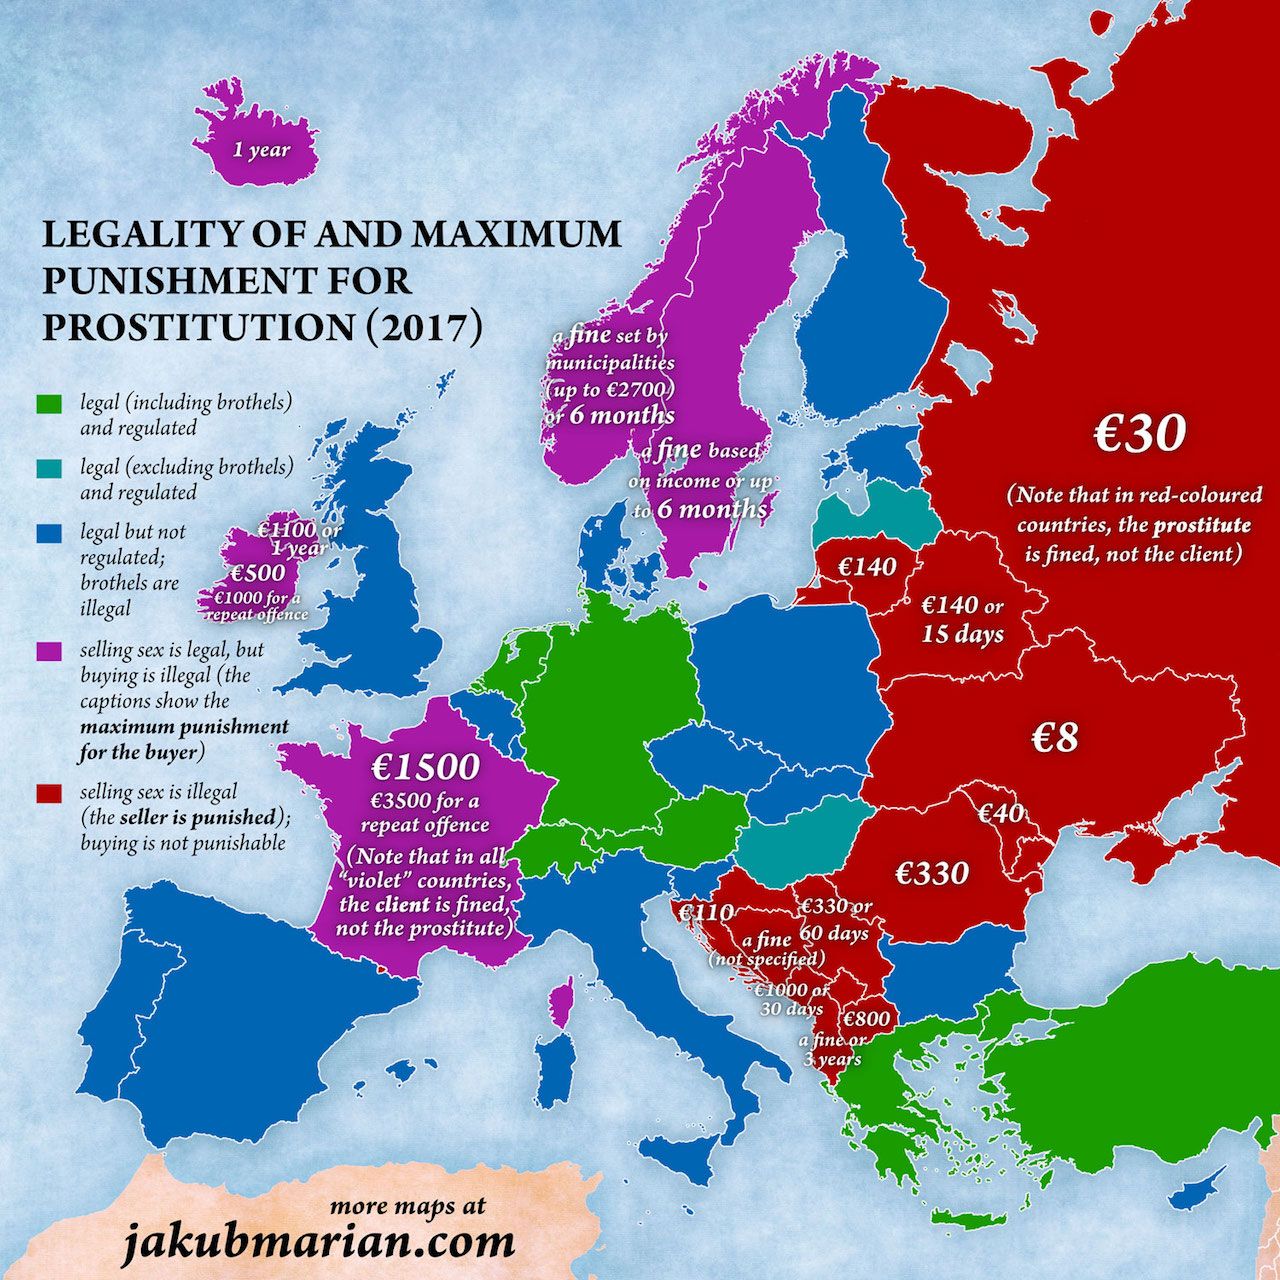 Map-of-prostitution-laws-in-Europe.jpg.ed826a104751b11d3e1cc80a903467ad.jpg